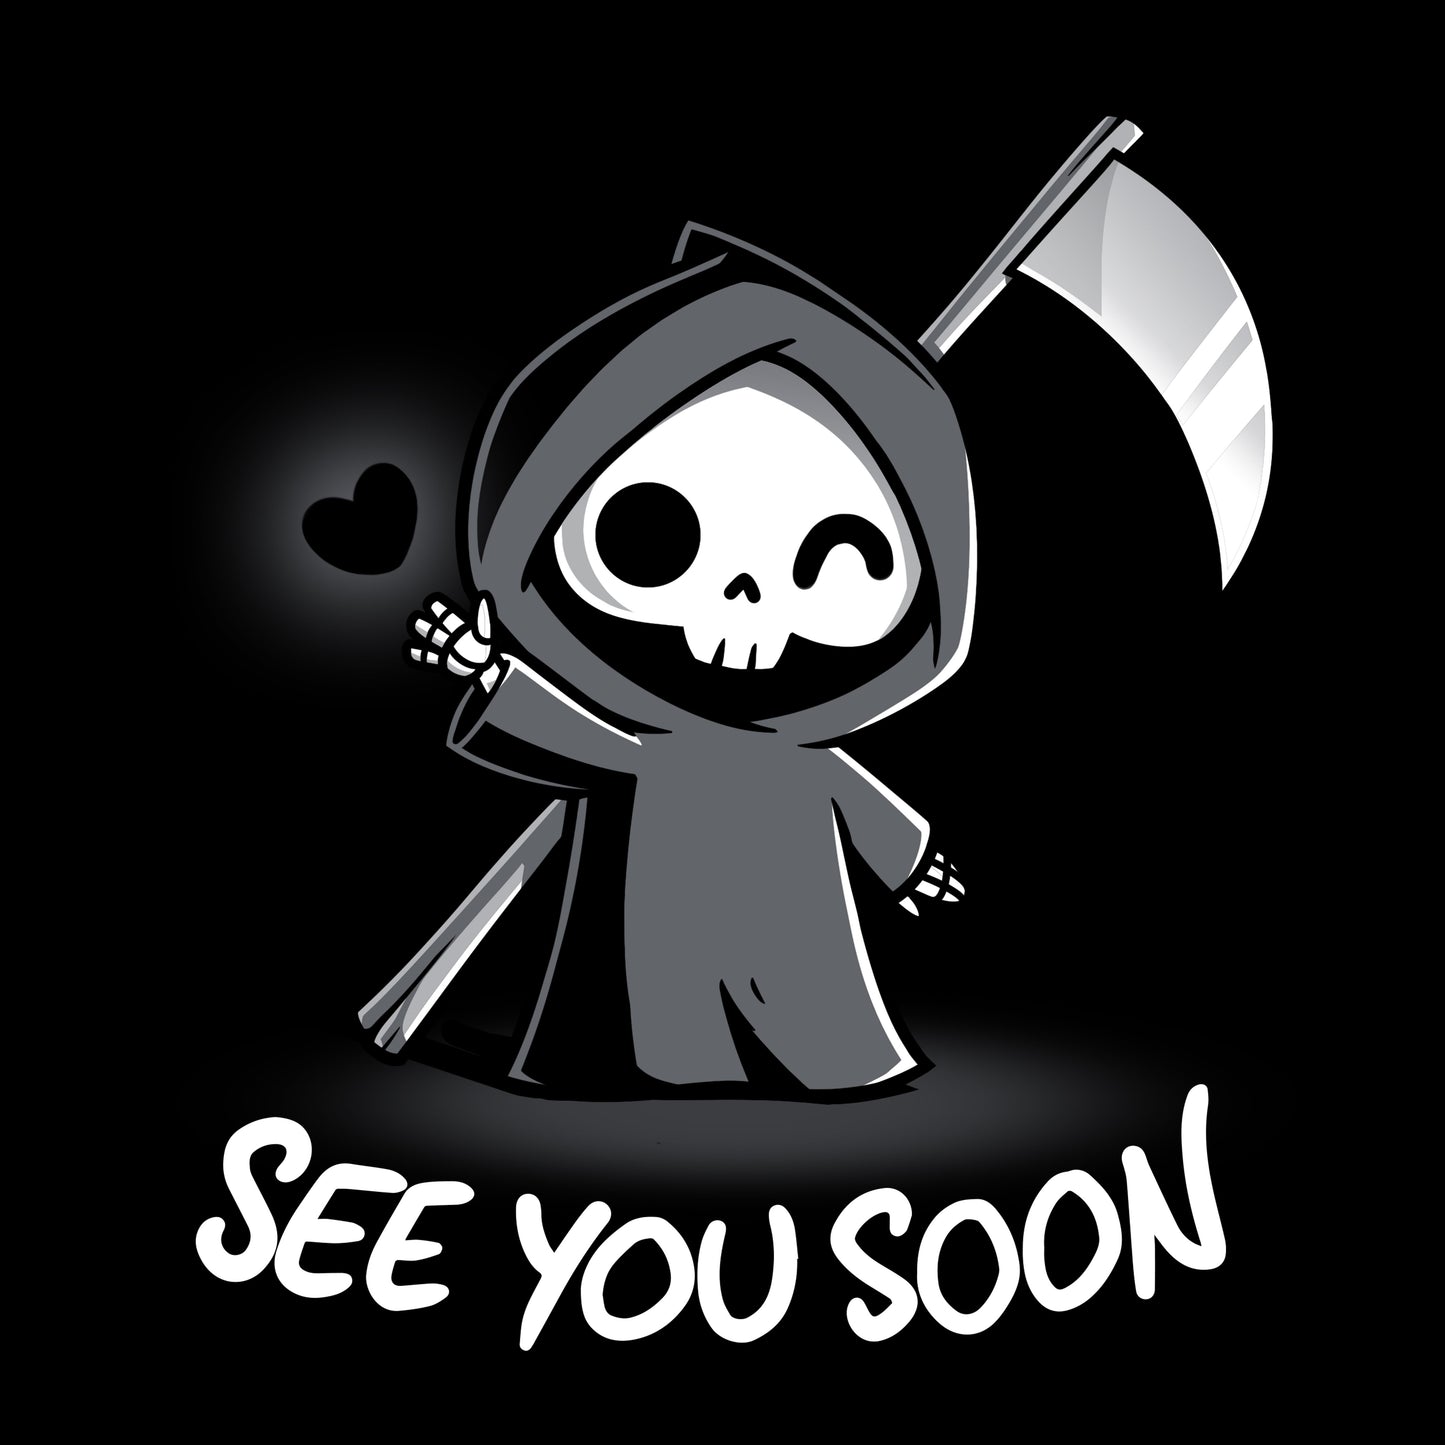 A skeleton wearing a black t-shirt holds a scythe, offering a small comfort by saying "See You Soon" – TeeTurtle.